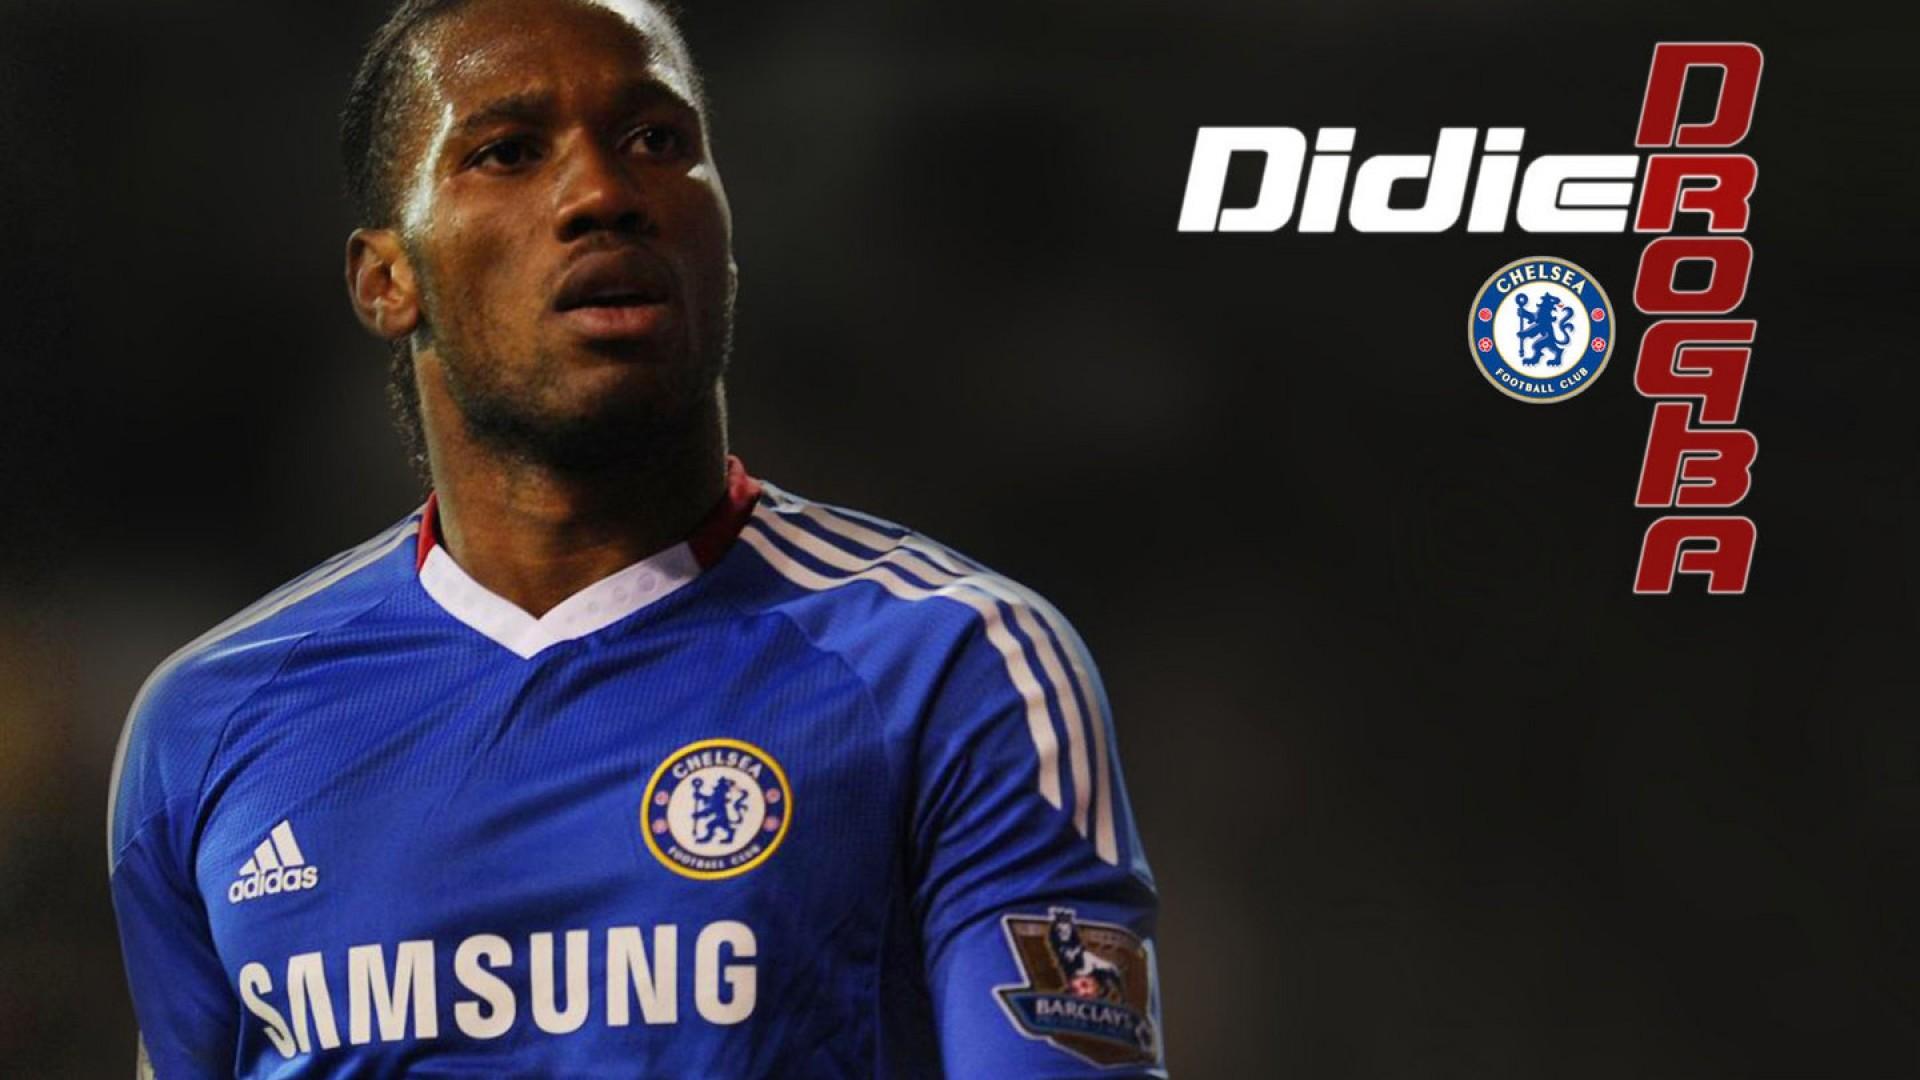 Didier Drogba Wallpaper background picture